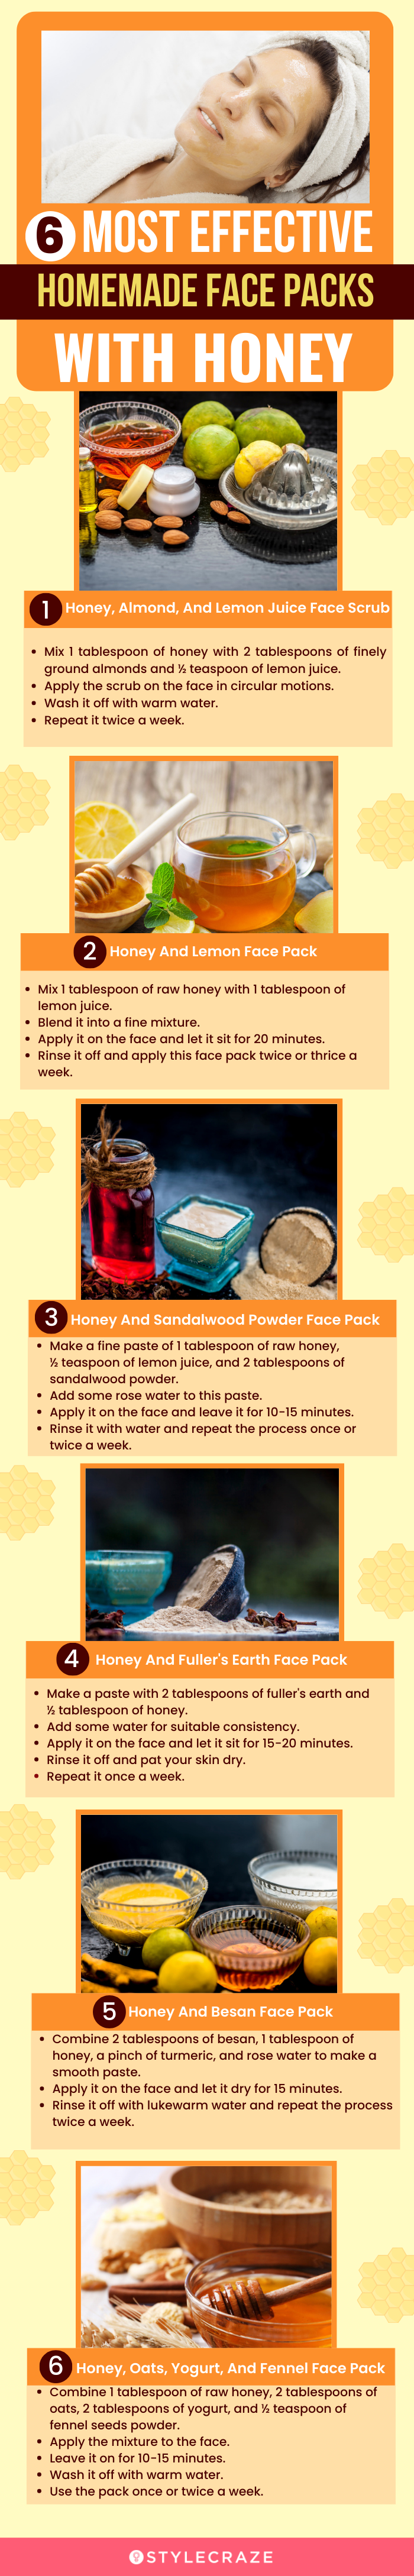 6 most effective homemade face packs with honey (infographic)